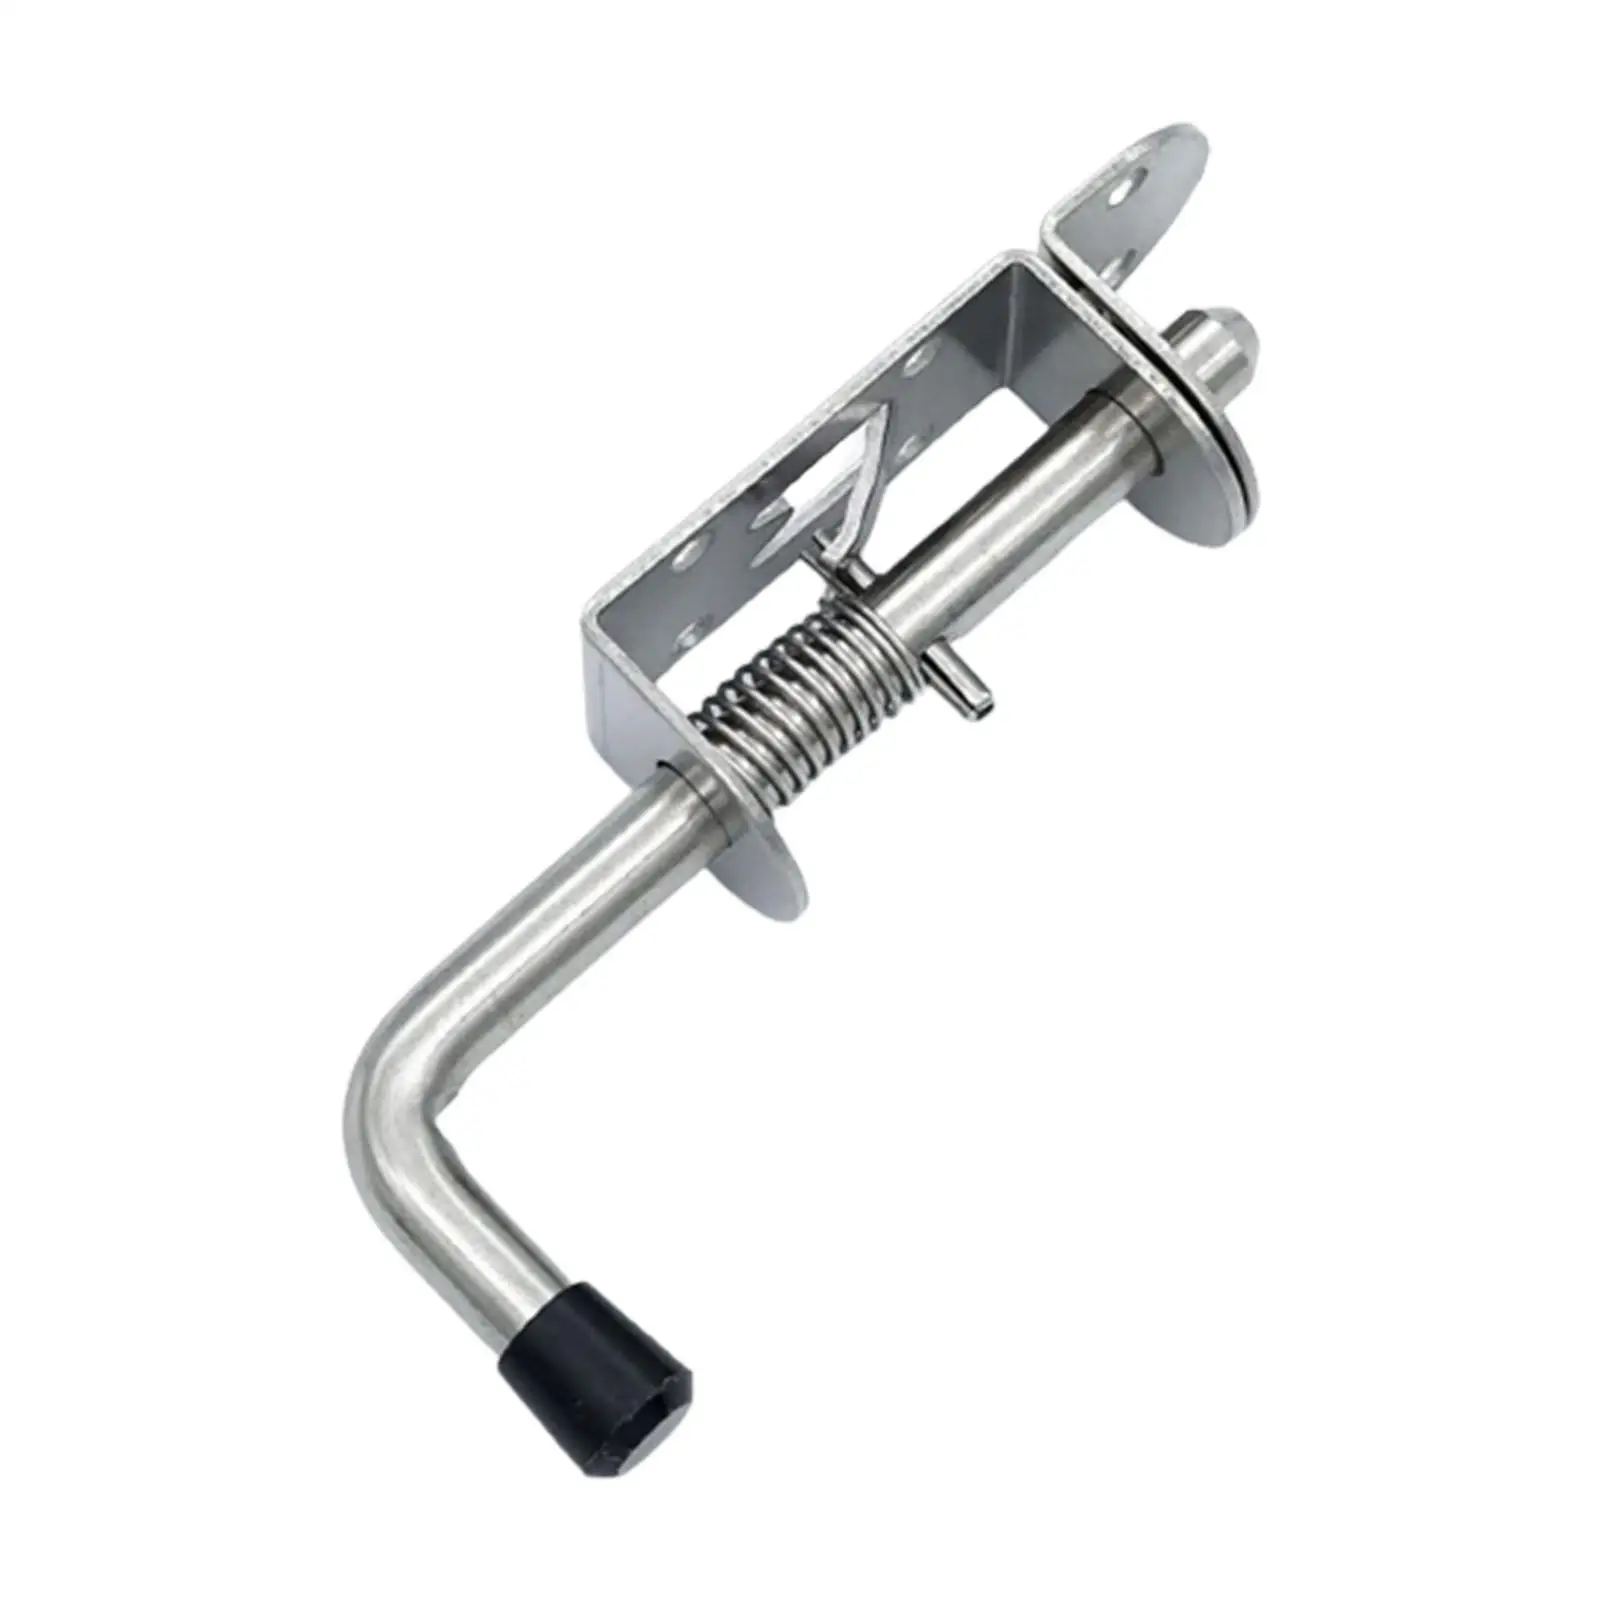 Spring Loaded Barrel Bolt Latch Pin Metal Lock Steel with Grip Sliding Latch Bolt for Chest Shed Utility Trailer Gate